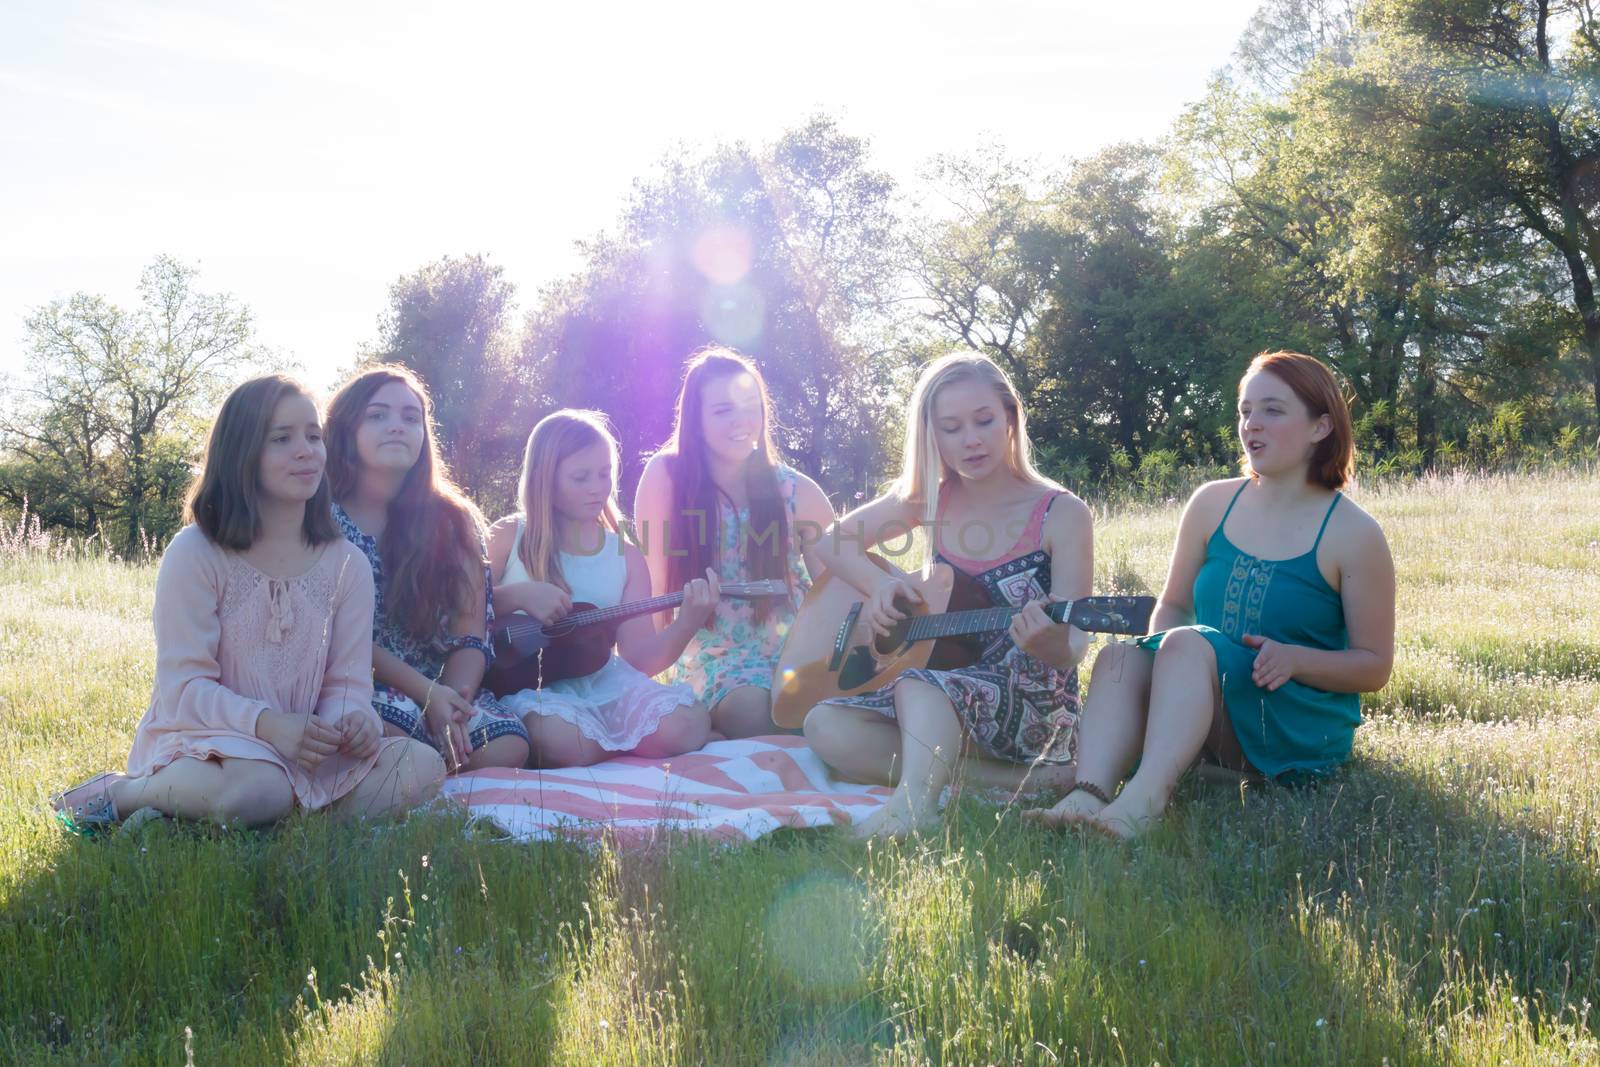 Young Girls Sitting Together in Grassy Field Singing and Playing Musical Instruments With Sunlight Overhead